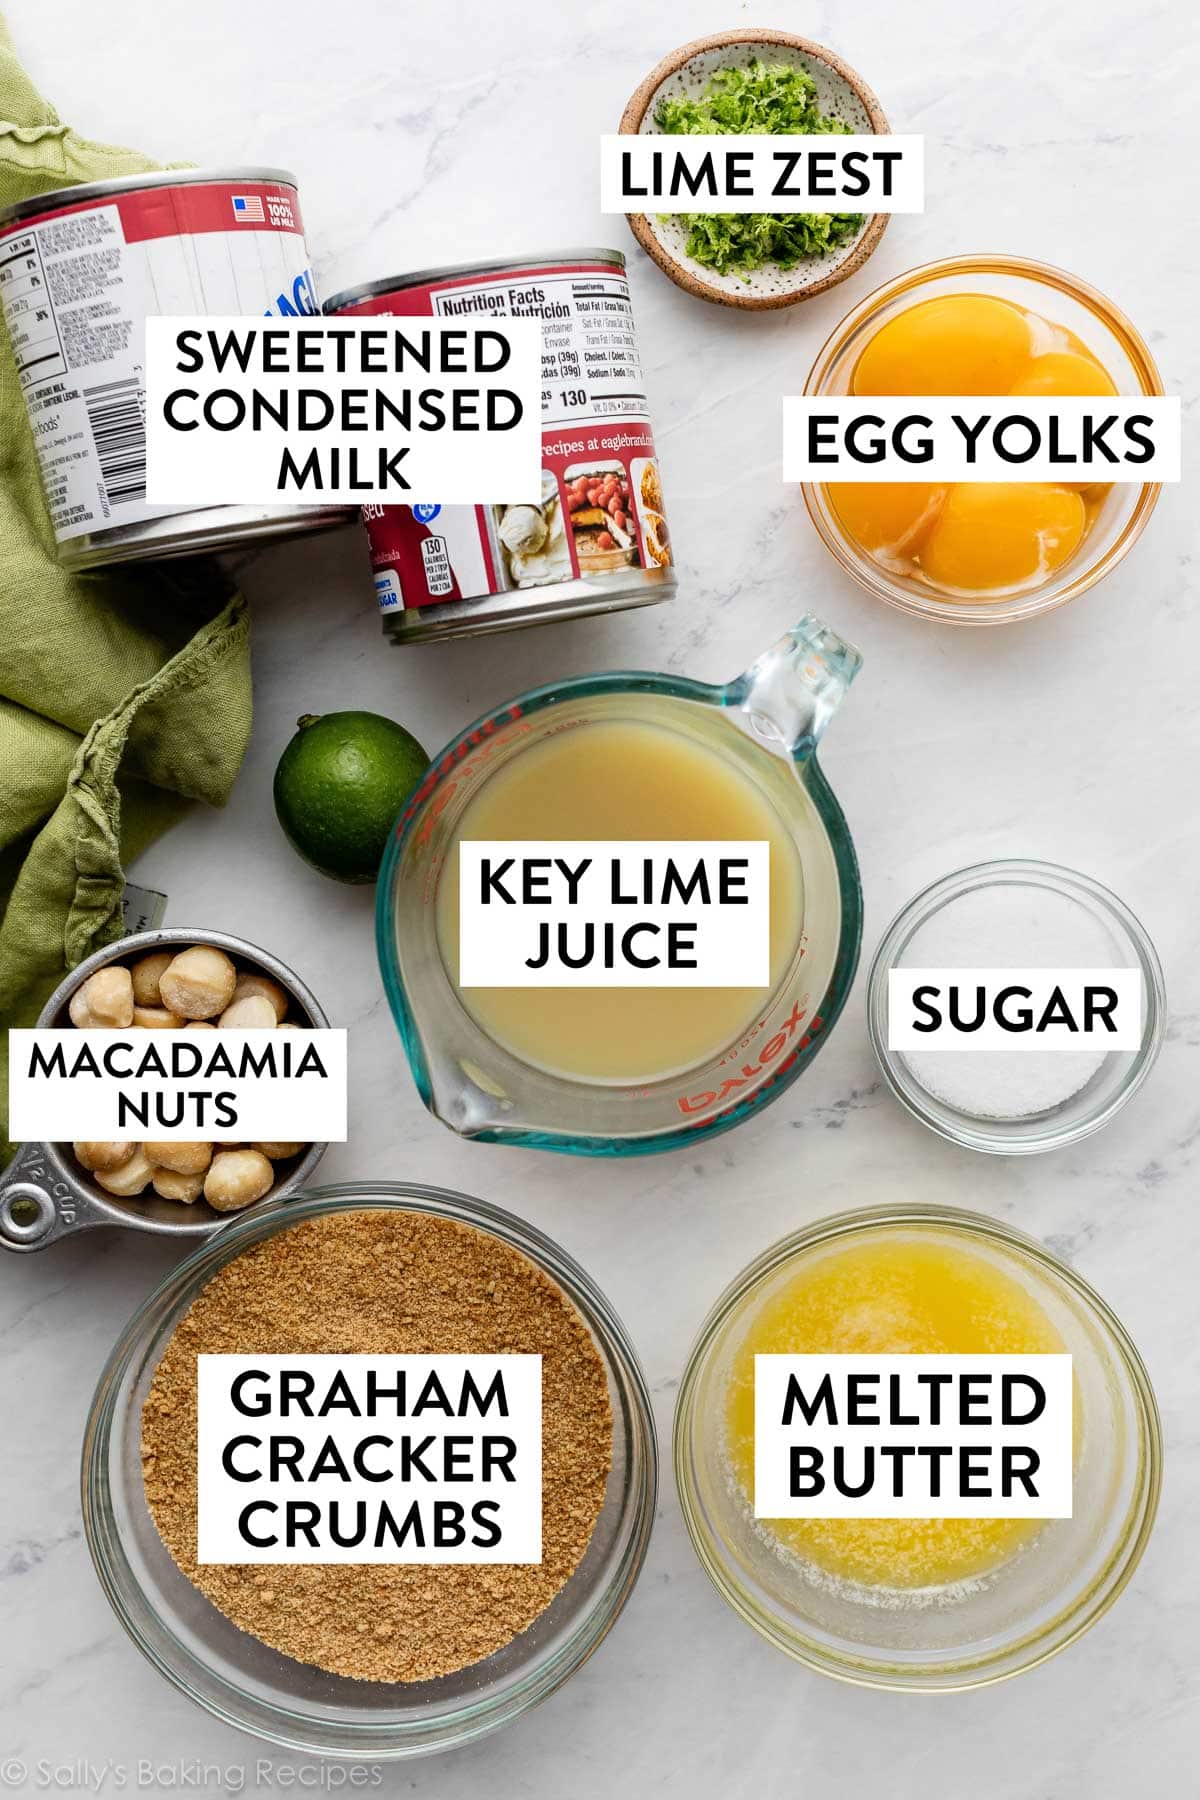 ingredients on counter including 2 sweetened condensed milk cans, egg yolks in bowl, melted butter, graham cracker crumbs, and sugar.